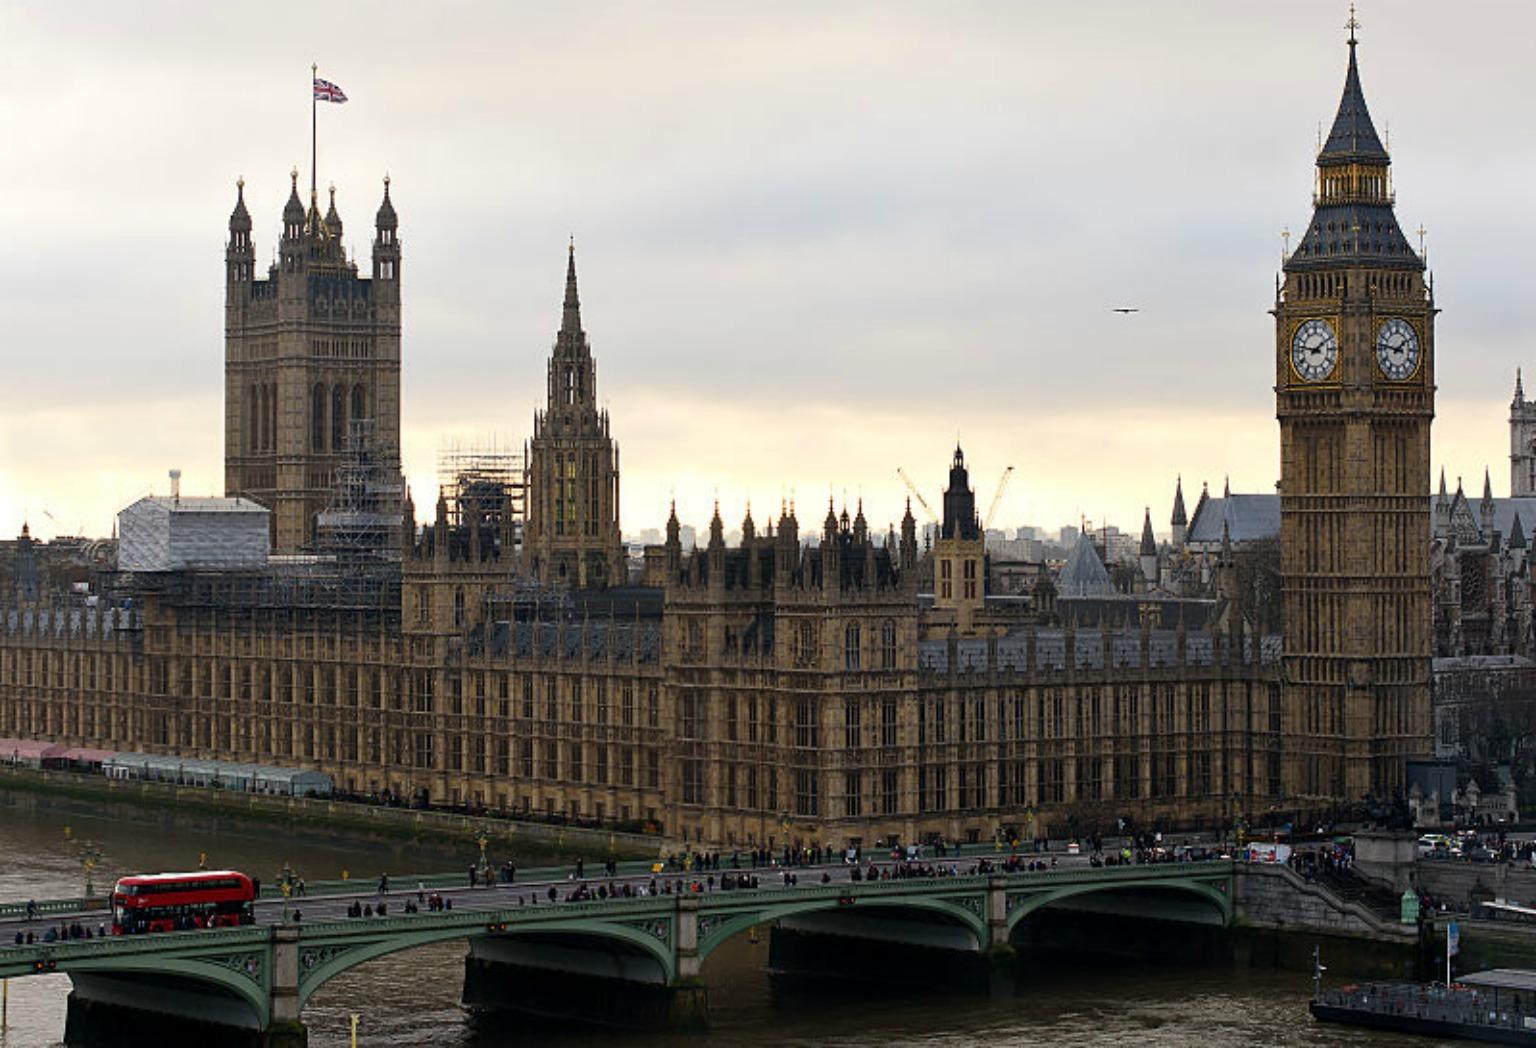 None of the MPs have been named, but the allegations could trigger a scandal in Whitehall resulting in resignations